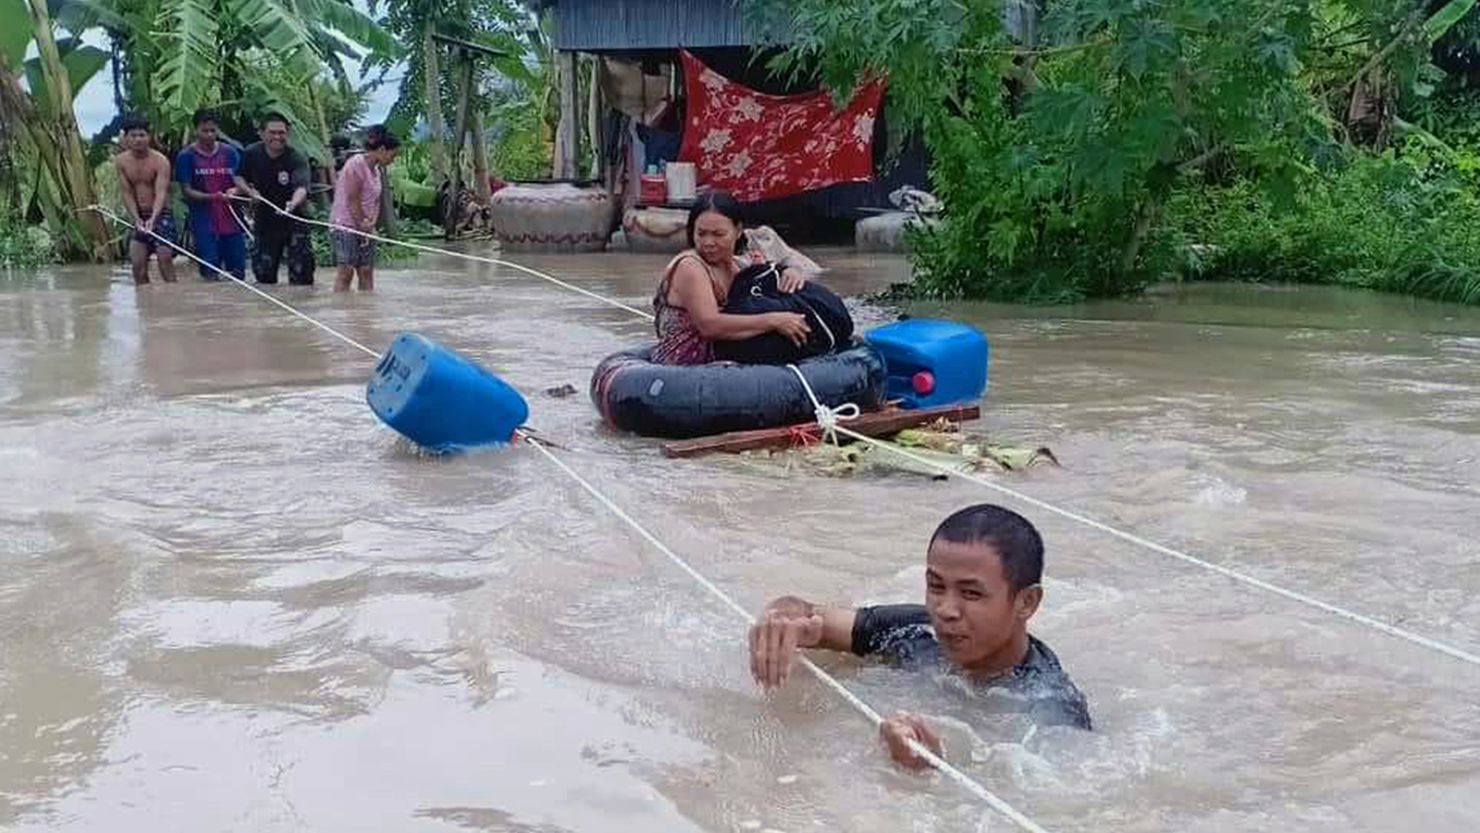 A soldier (front) holds onto a rope as a woman (C) is is pulled to safety through flood waters in a village in Cambodia's western Battambang province on October 10, 2020, following heavy rains in the region. (Photo by STR / AFP) (Photo by STR/AFP via Getty Images)